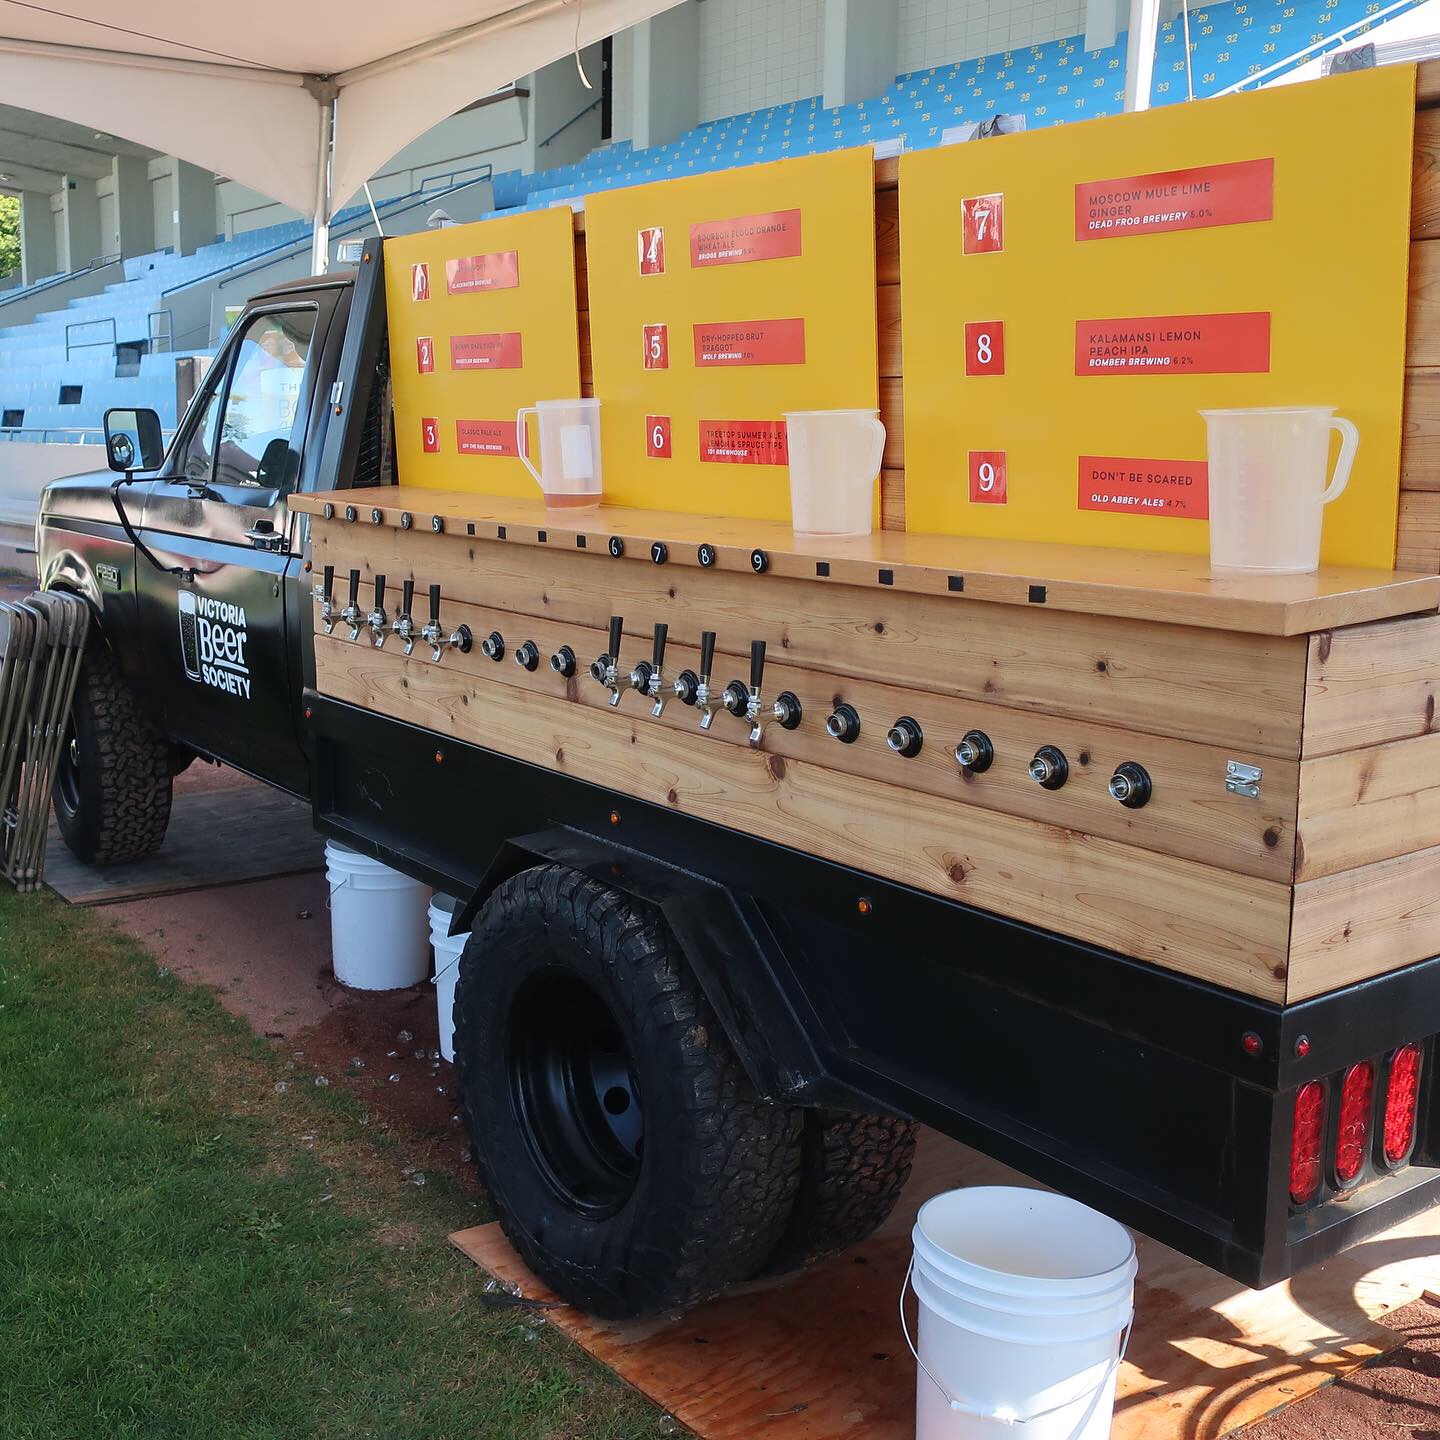 The BC Ale Trail has its very own beer truck. During the 2019 Great Canadian Beer Festival it poured various beers from the ale trail.